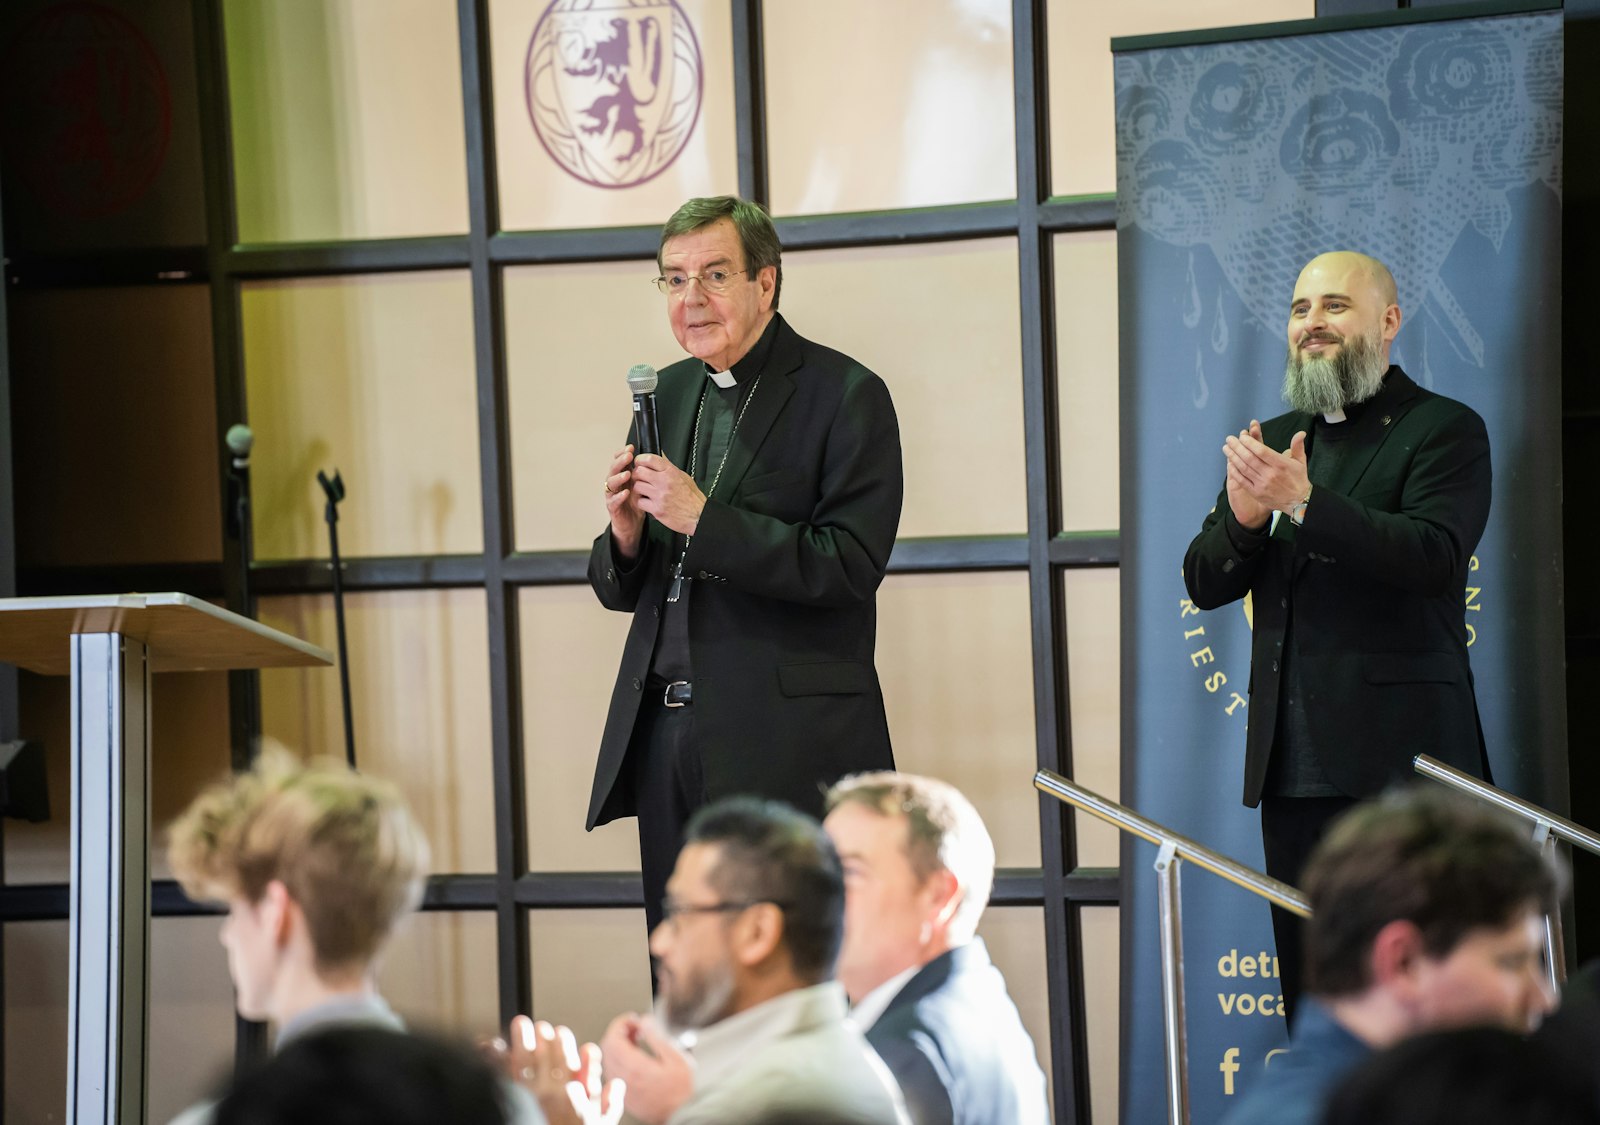 Archbishop Vigneron and Fr. Craig Giera, director of priestly vocations for the Archdiocese of Detroit, right, address the young men gathered in the seminary's gymnasium for dinner and discussion.